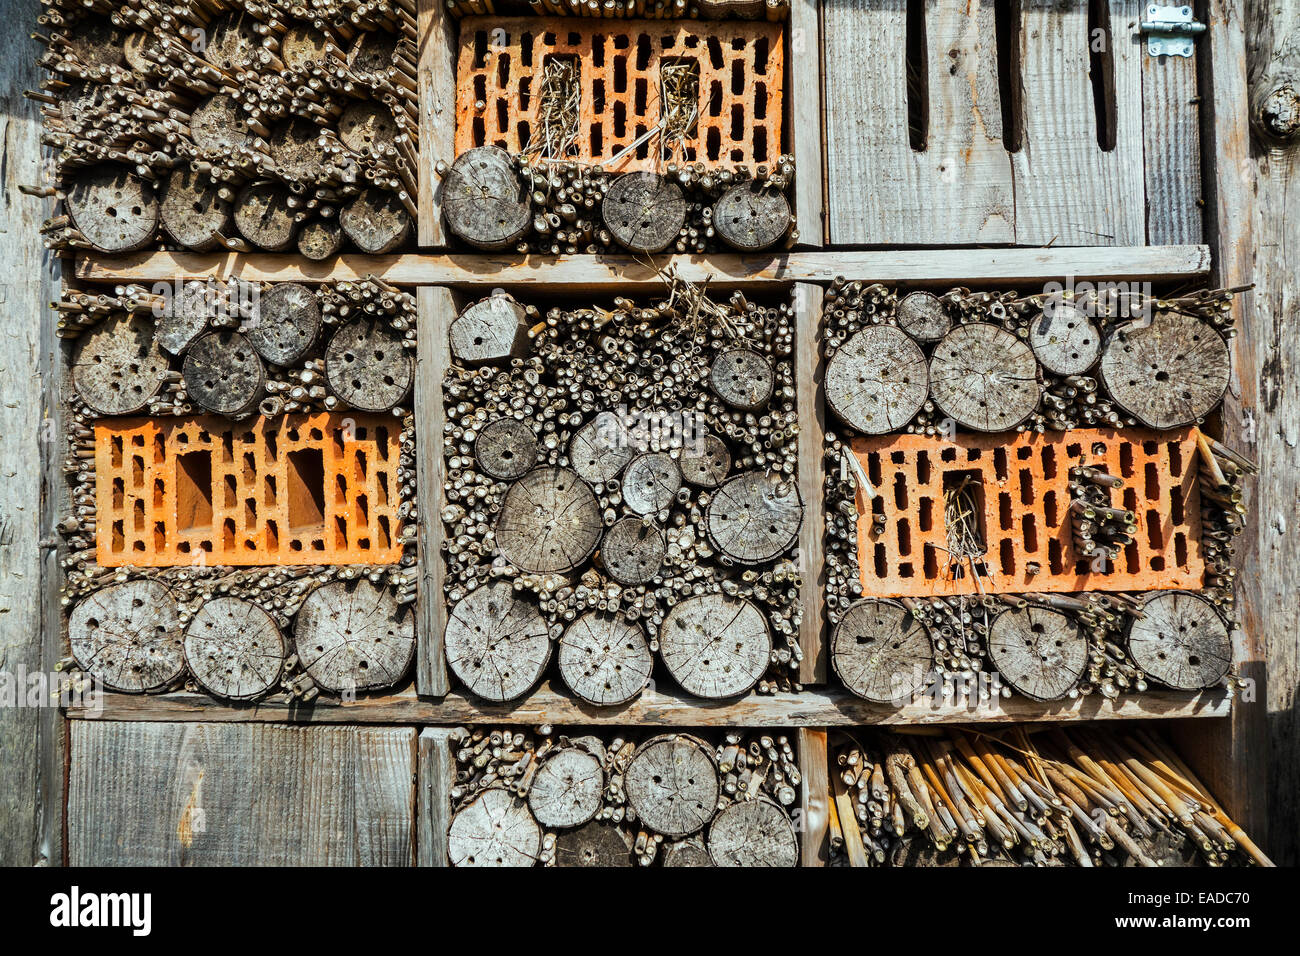 Insect hotel for solitary bees and artificial nesting place for insects / invertebrates with nest holes in hollow stems and wood Stock Photo